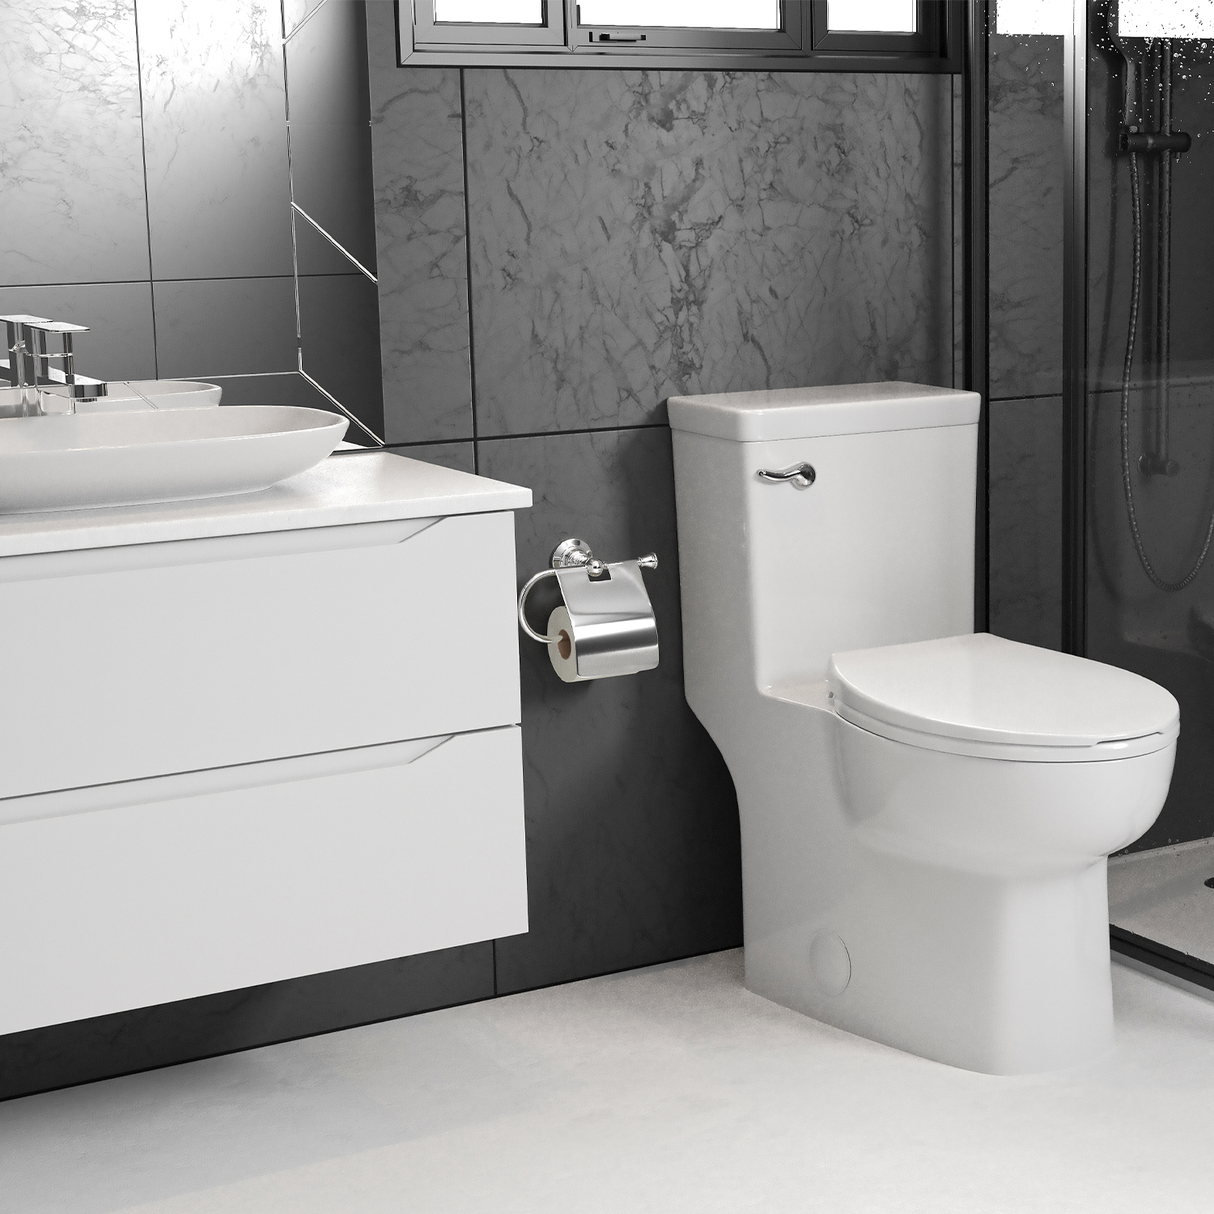 DAX Ceramic Toilet with Soft Closing Seat, White BSN-CL12335S